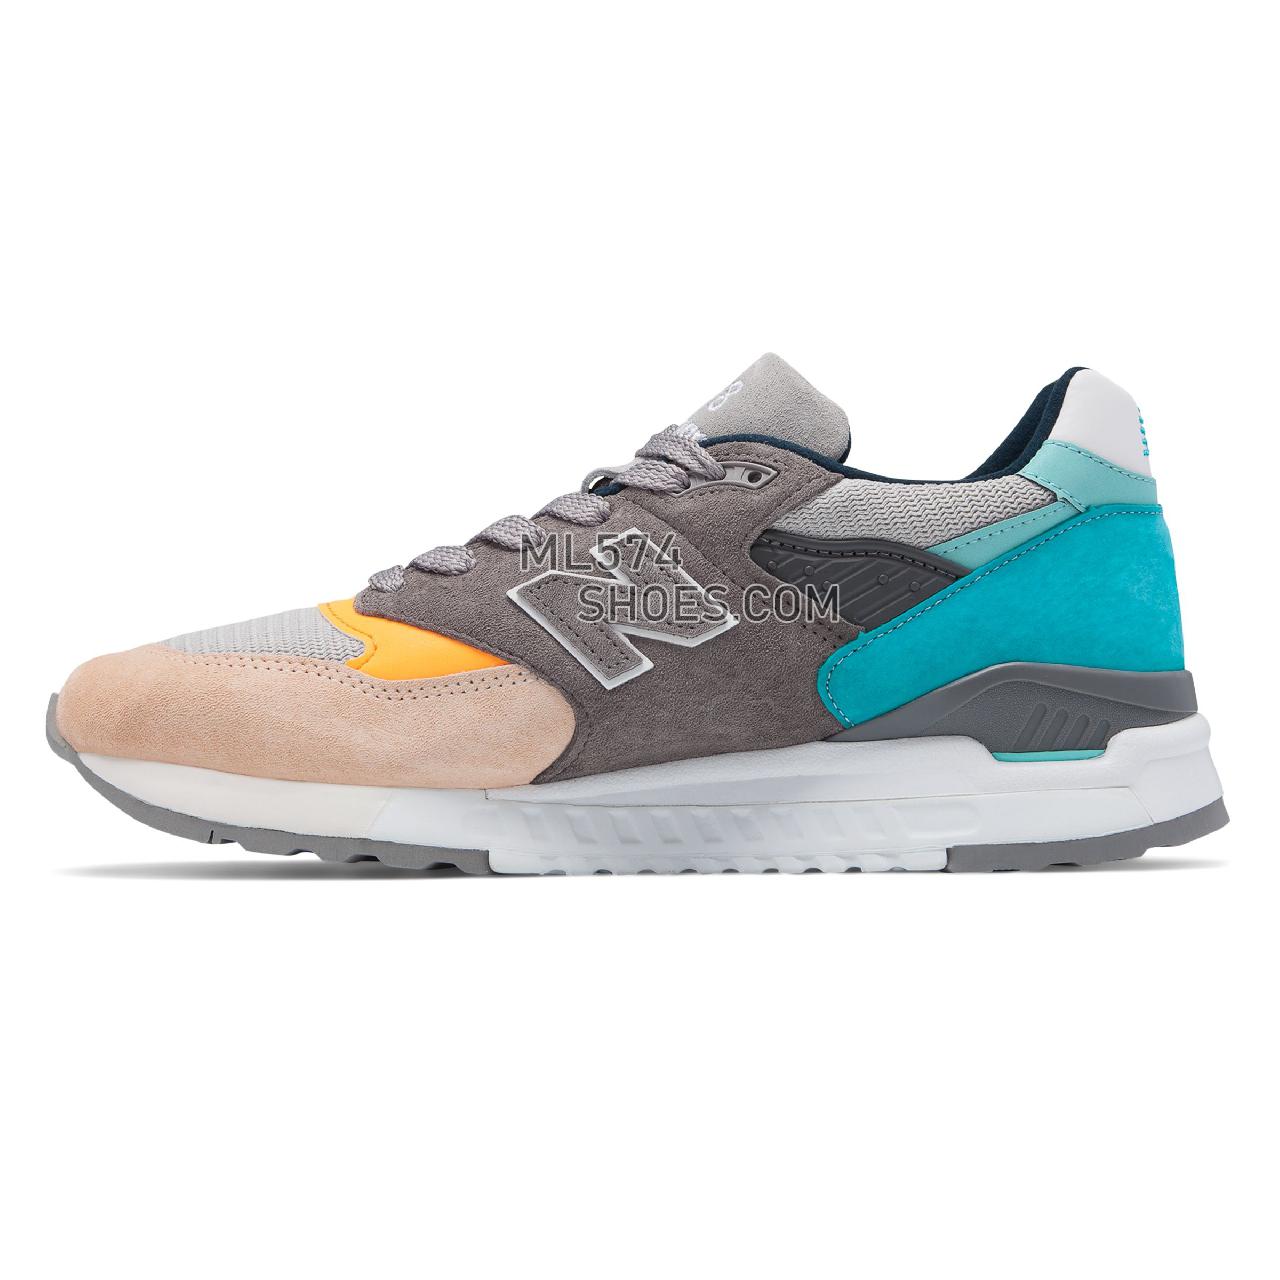 New Balance Made in US 998 - Men's 998 Made in US - Grey with Blue - M998AWB